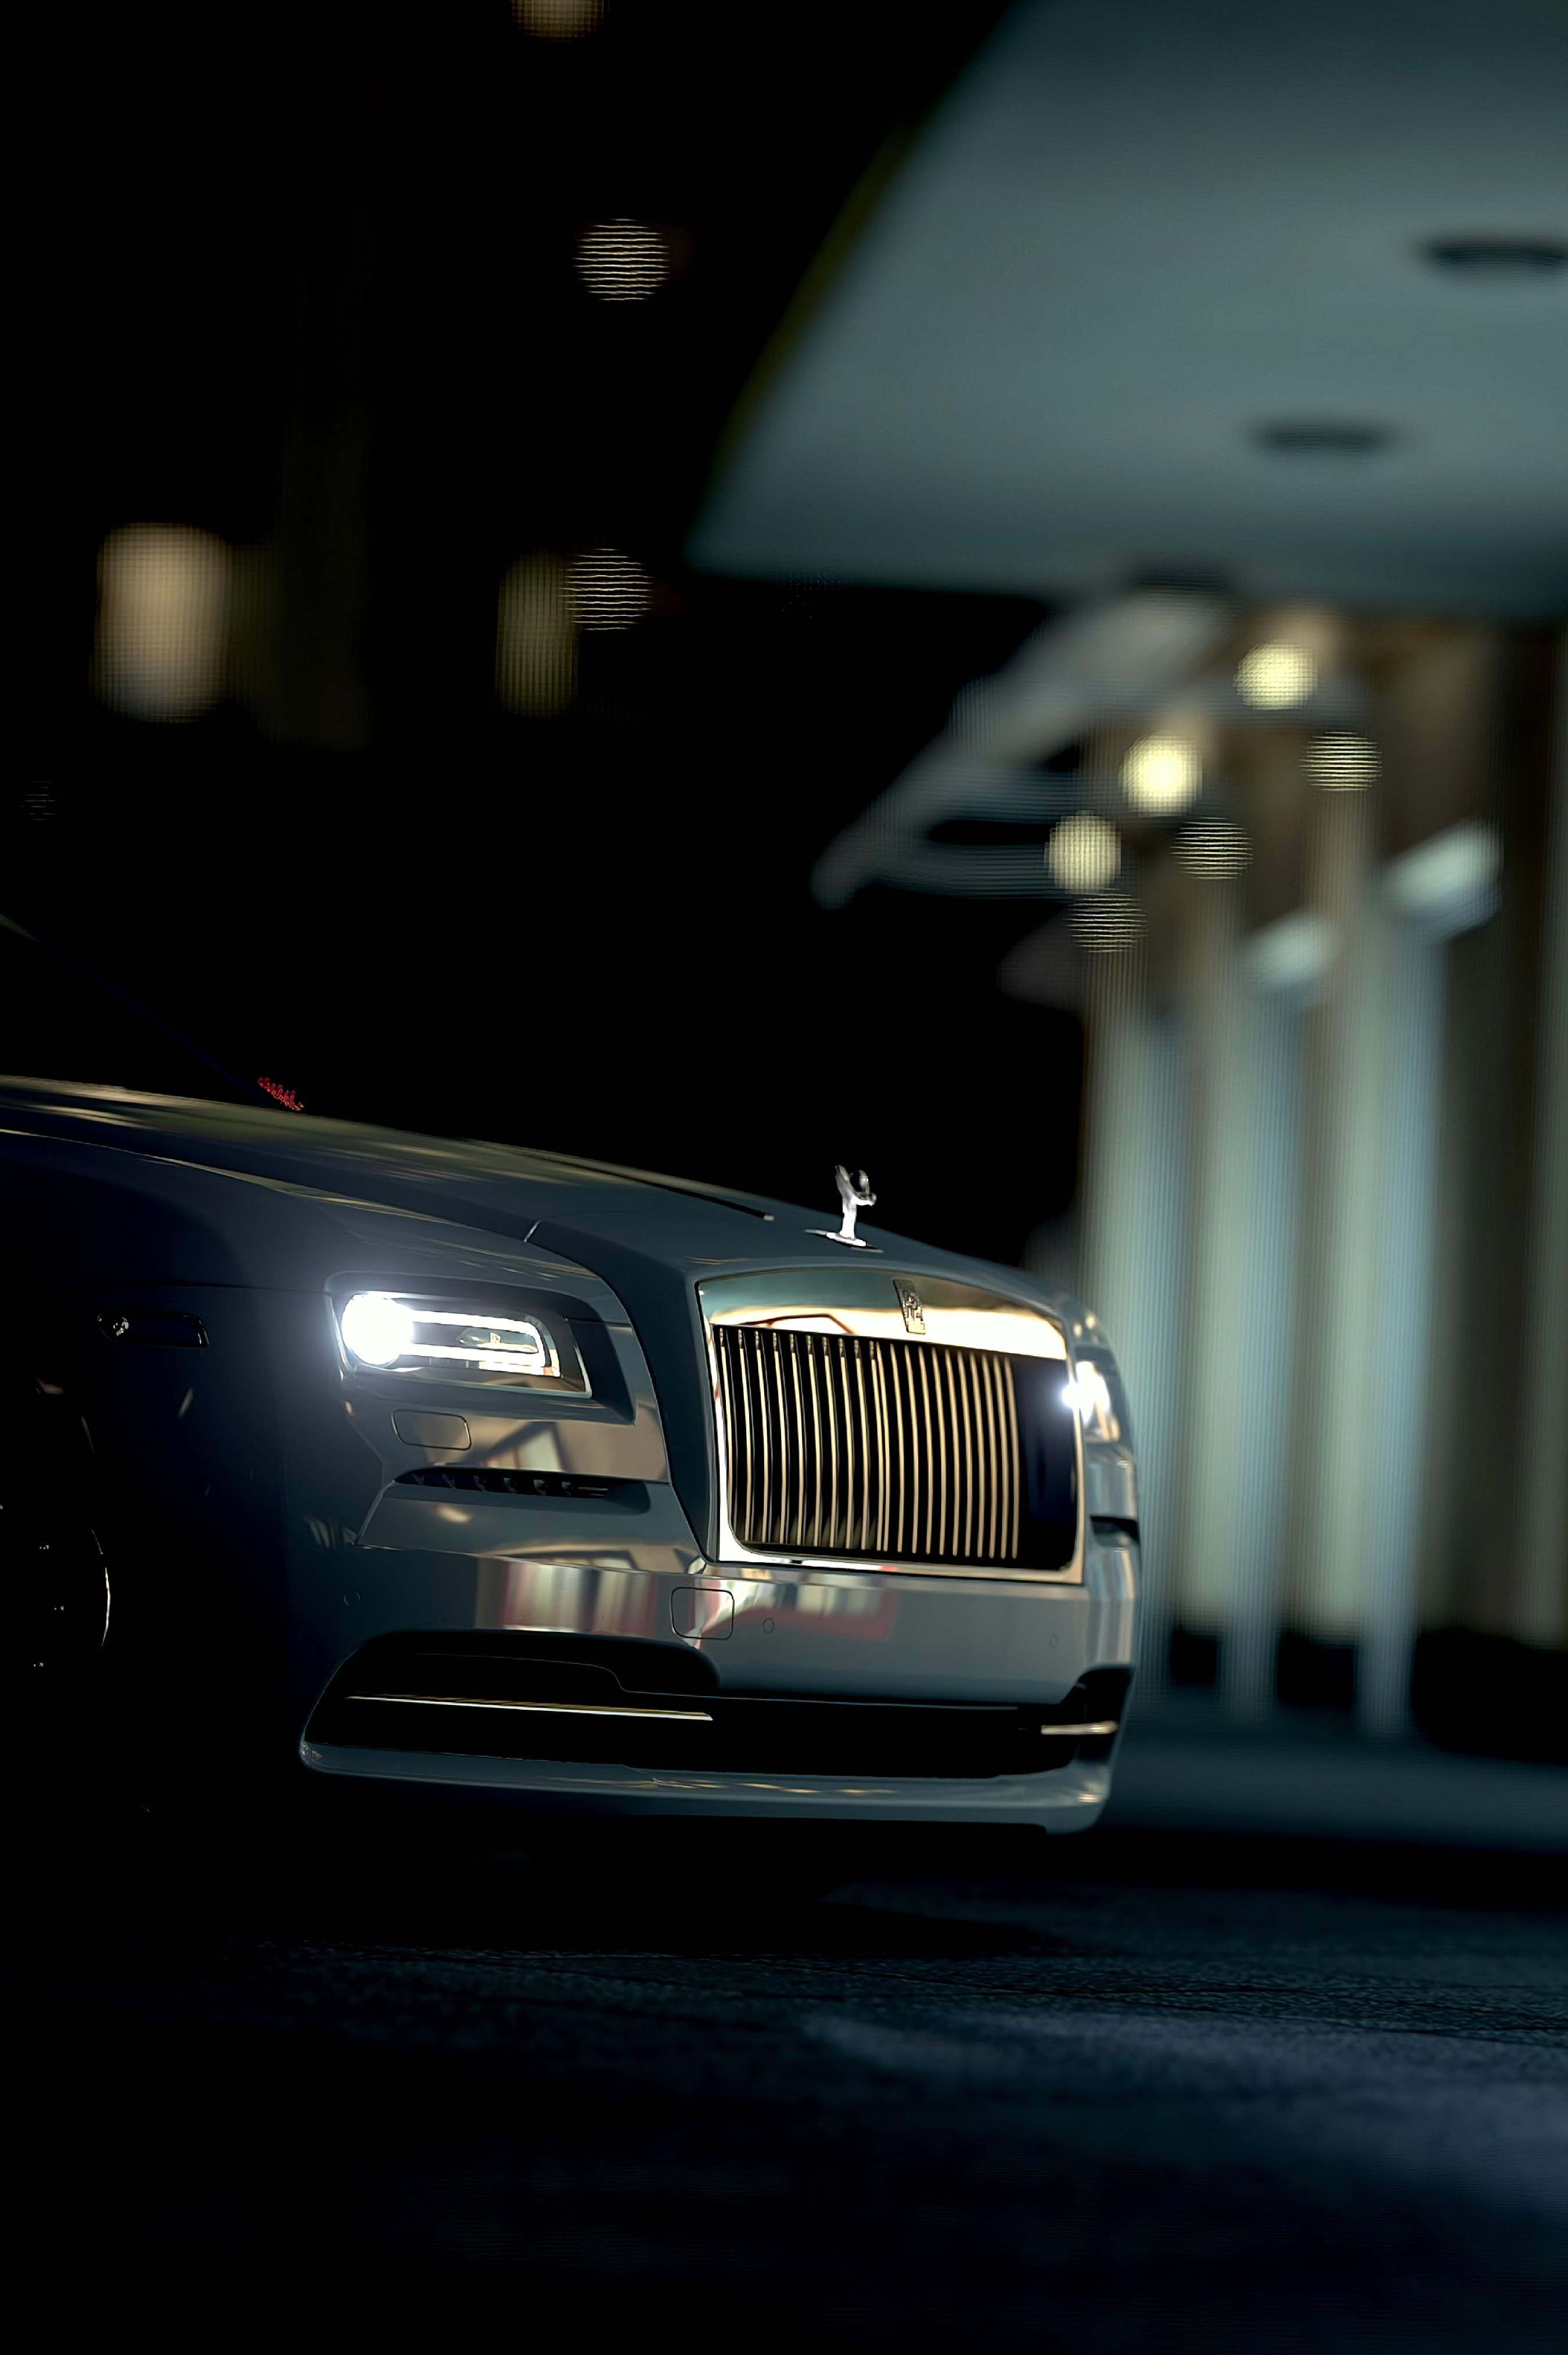 android cars, rolls royce, front view, bumper, lights, headlights